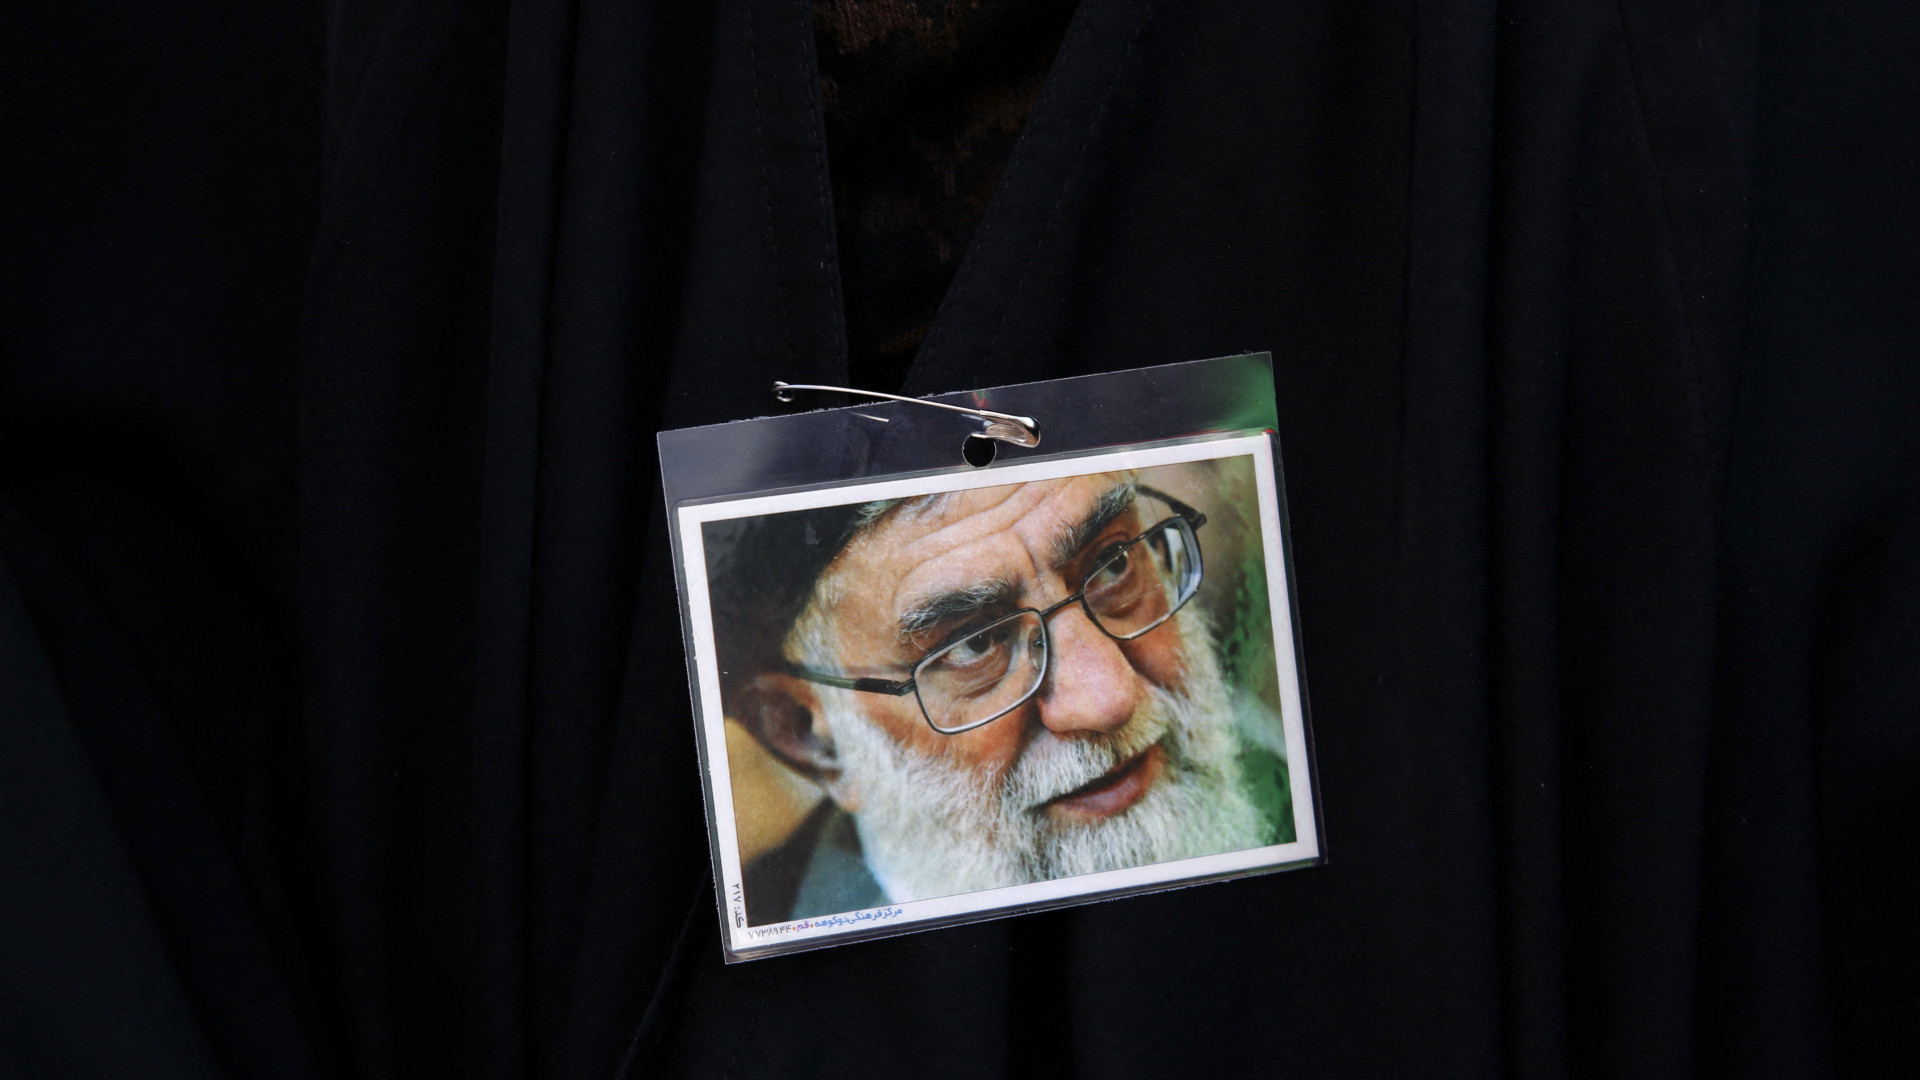 An Iranian pro-government protester wears a pin with a portrait of Supreme Leader Ayatollah Ali Khamenei during a rally against the recent anti-government protests, in Tehran, on 25 September (AFP)